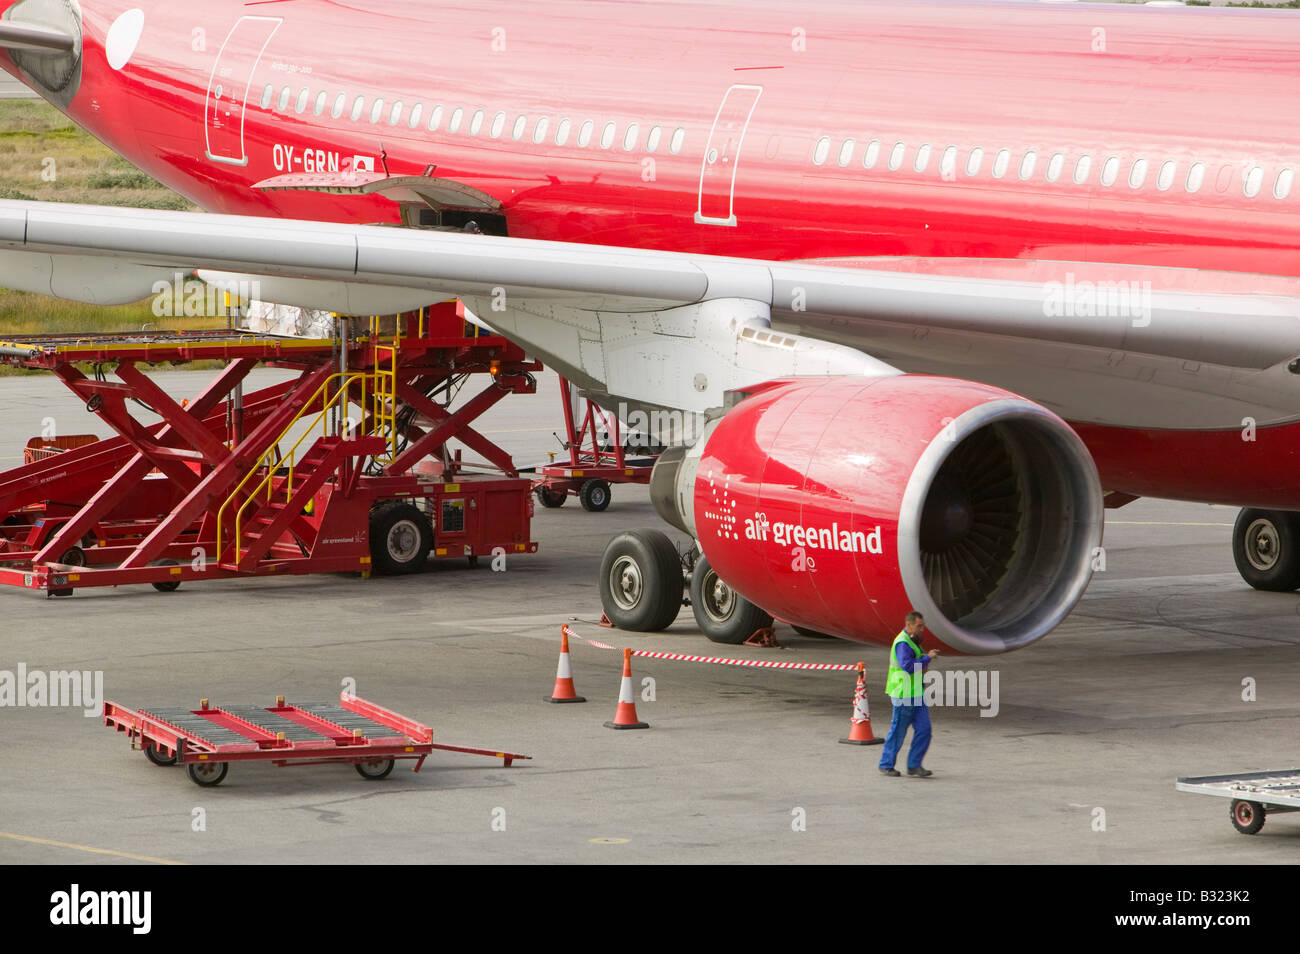 An air Greenland flight at Kangerlussuaq airport bringing freight and tourists to Greenland Stock Photo